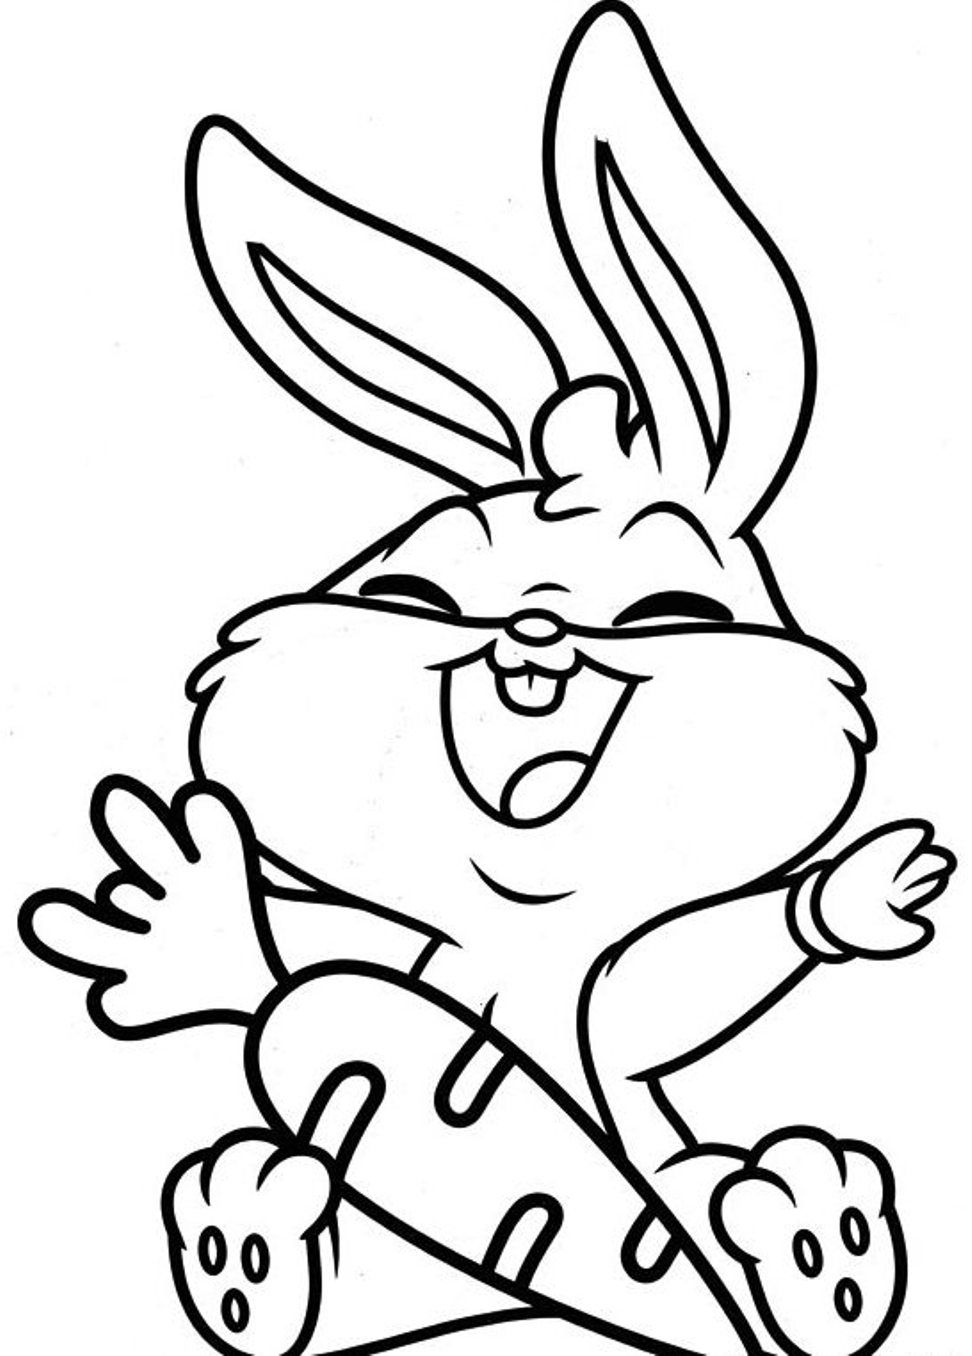 Coloring Pages Bugs Bunny Coloring Pages Printable Free Charlie - Free Printable Bugs Bunny Coloring Pages